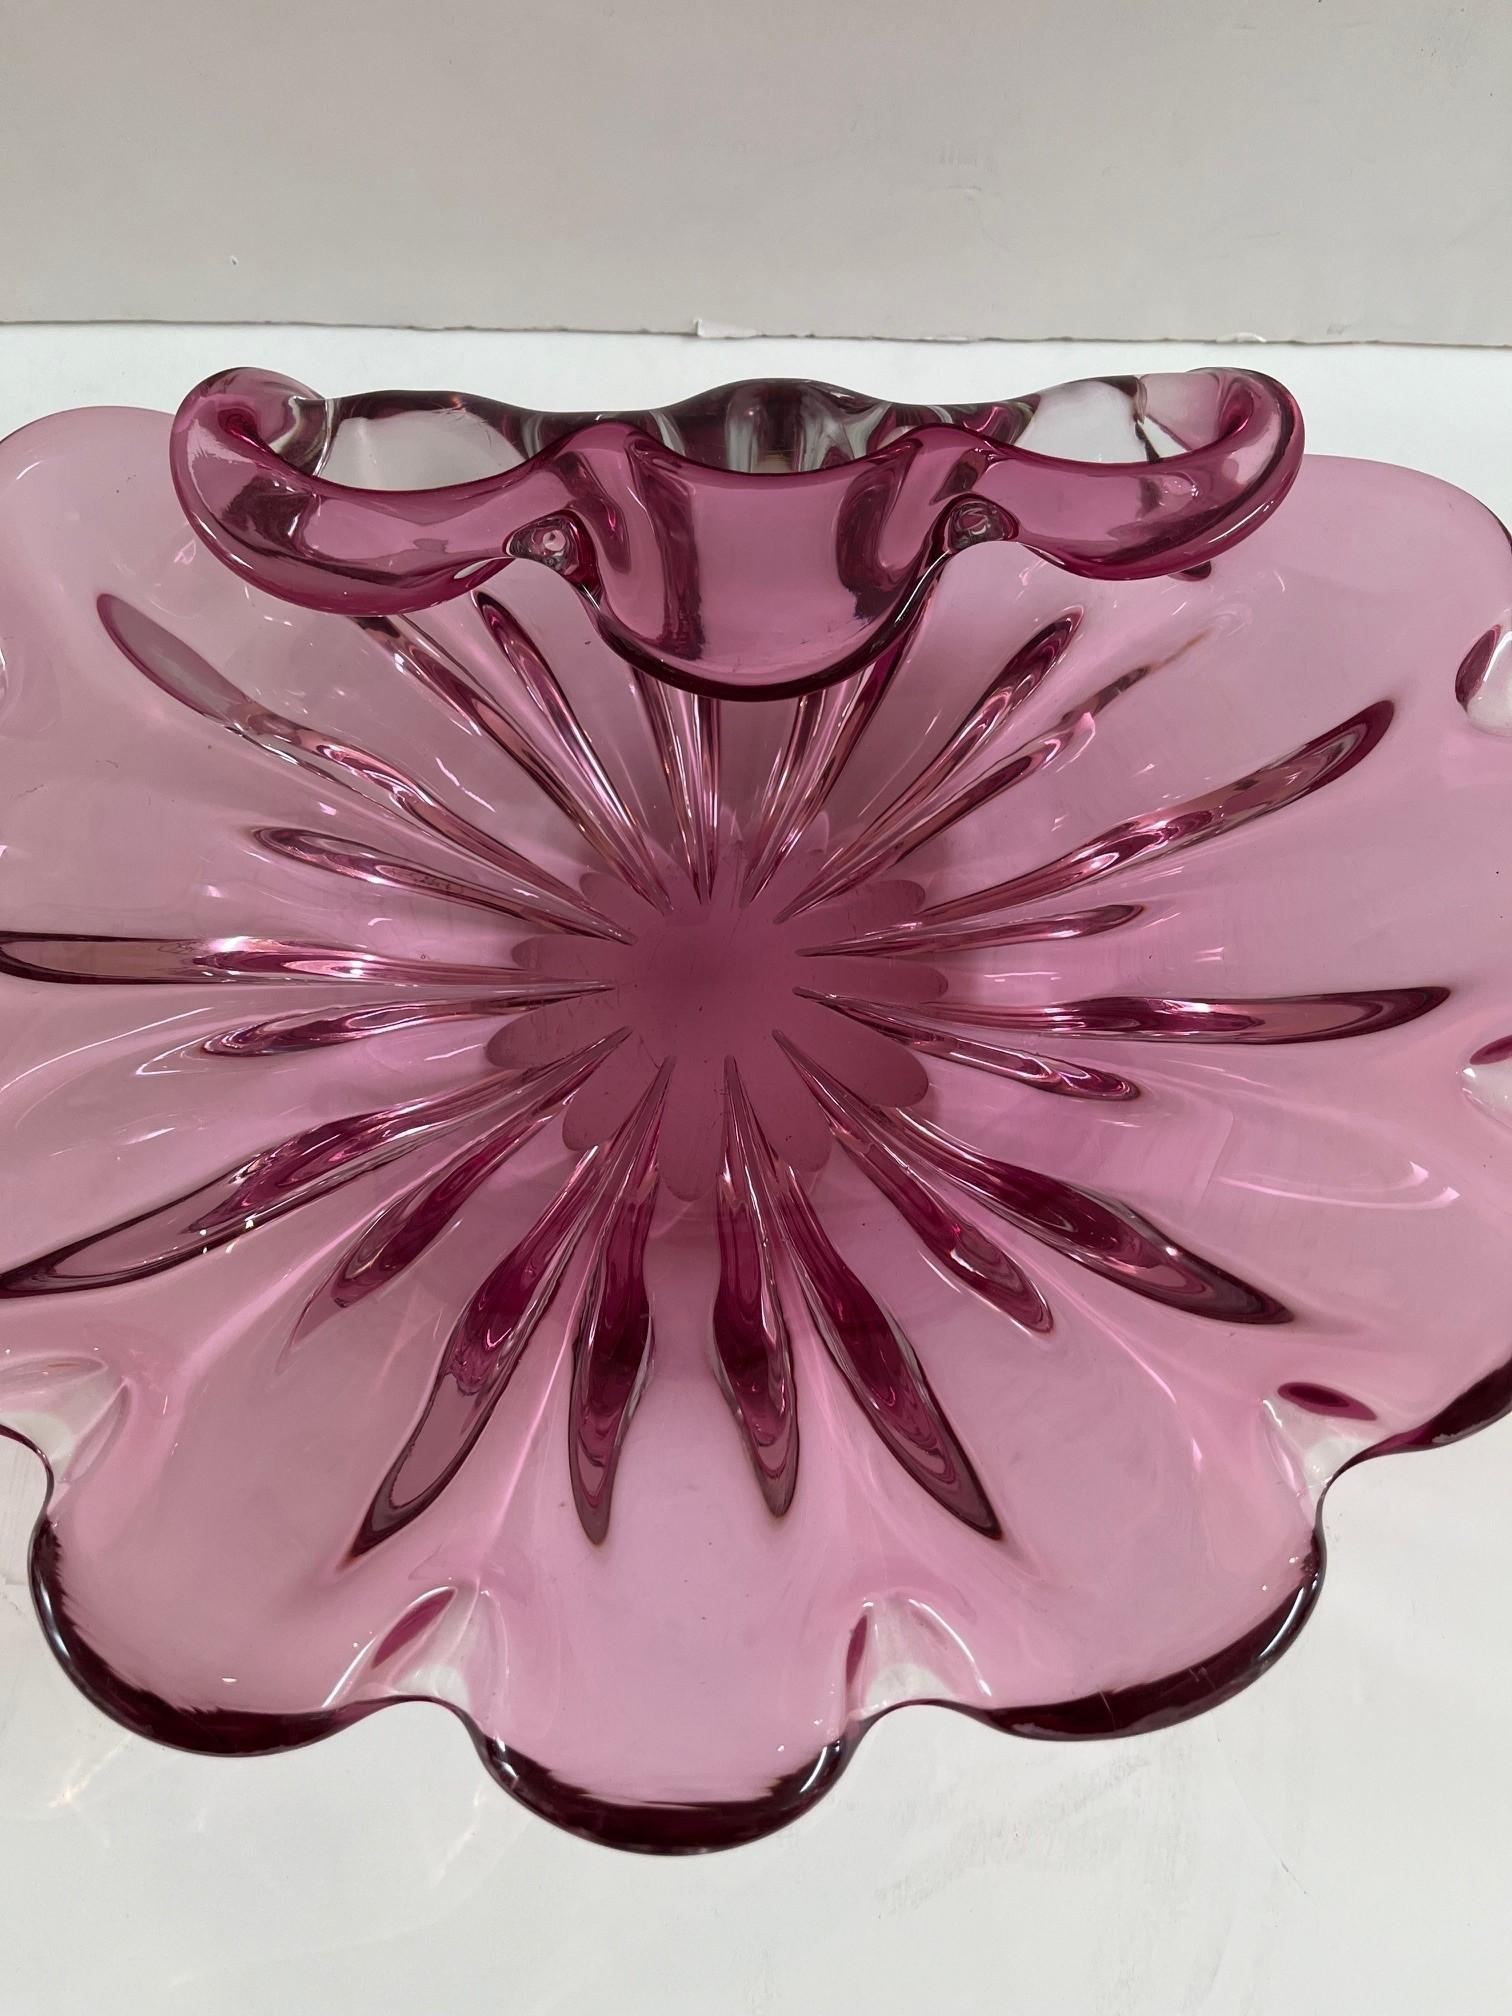 Vintage Extra-Large Murano Glass Rolled Edge Shell Bowl, High Quality Murano Glass has a Unique Form of Shell has very rare Pink Coloration, Made in Italy Formia Vetri